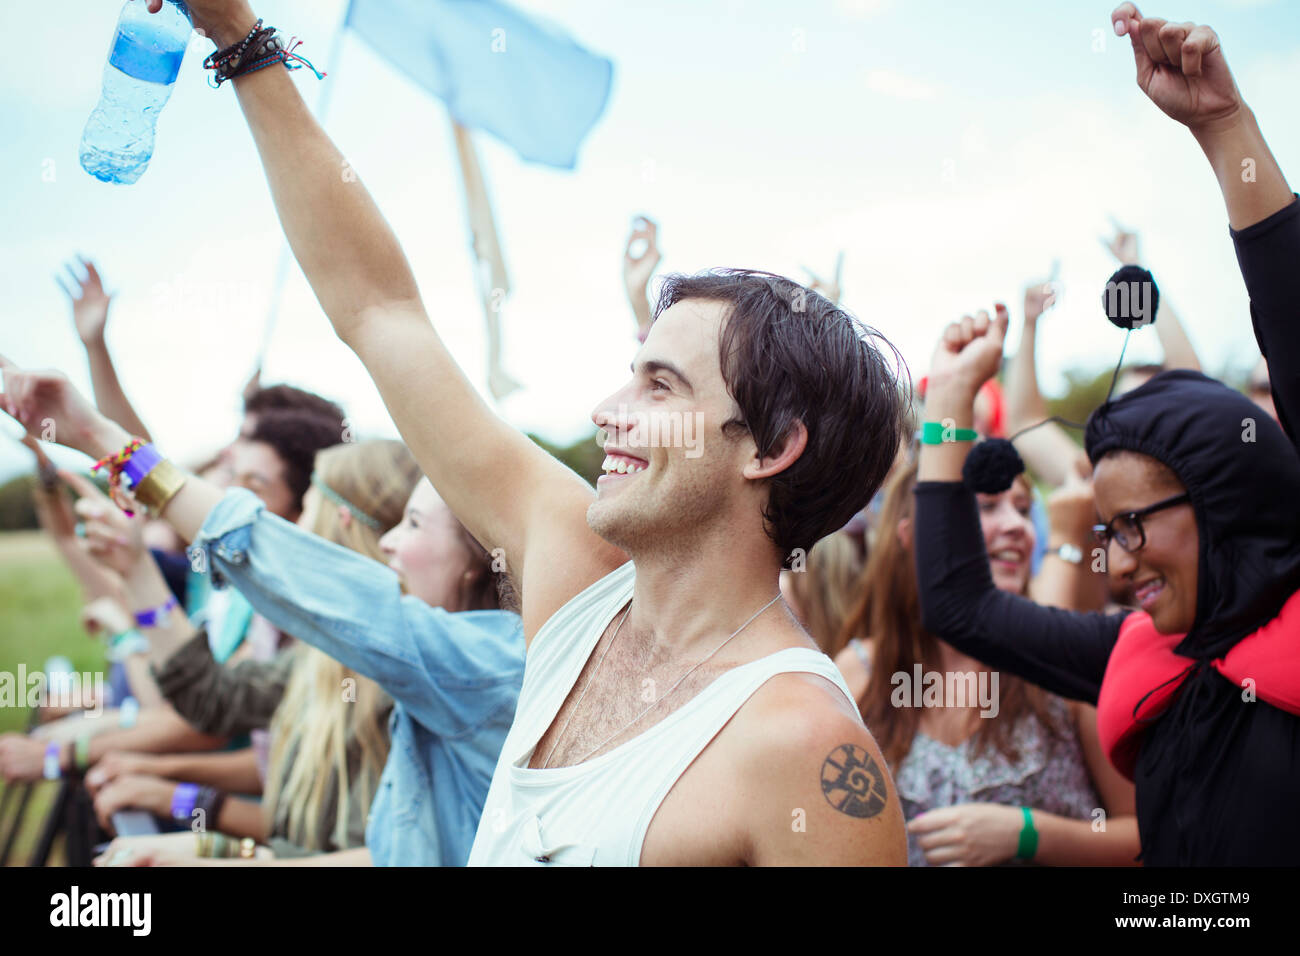 Man with water bottle cheering at music festival Stock Photo